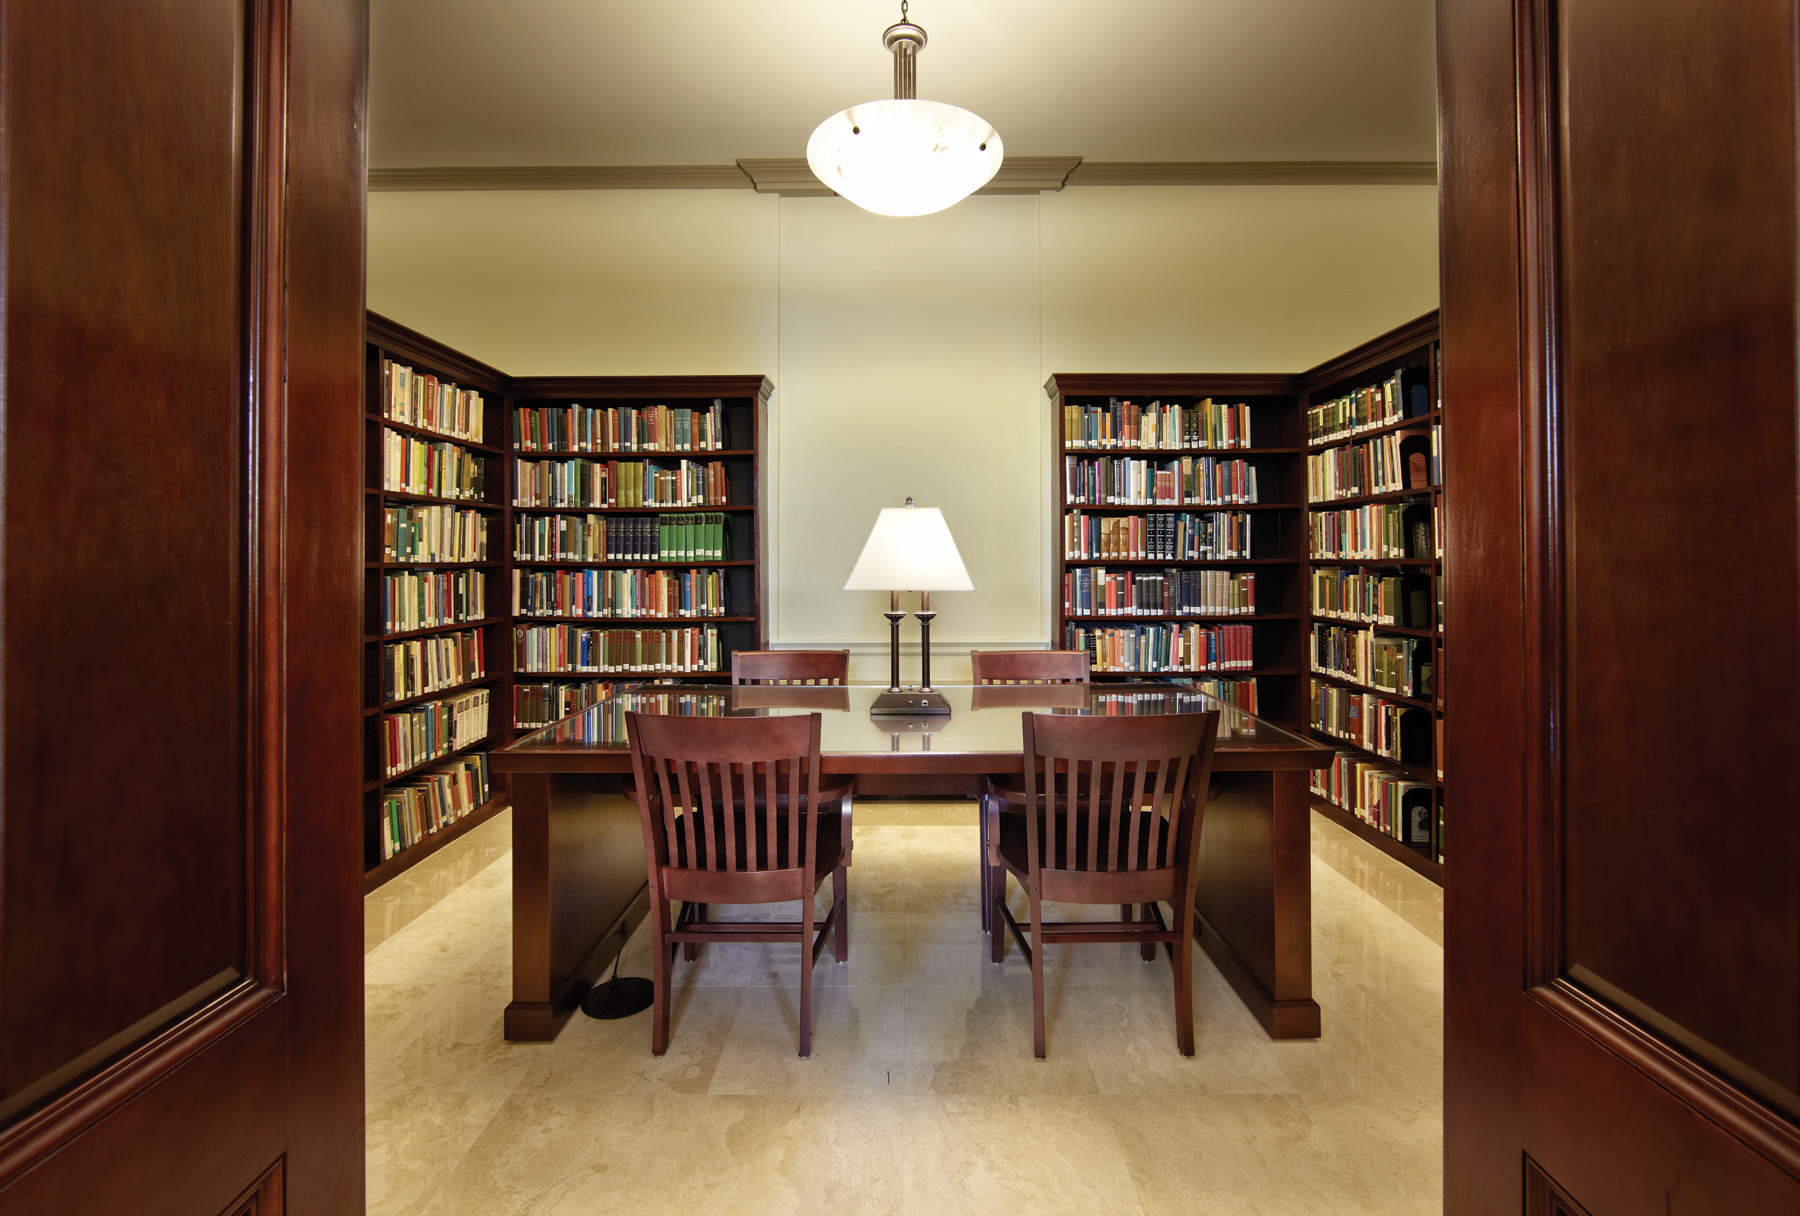 Iona College, Ryan Library